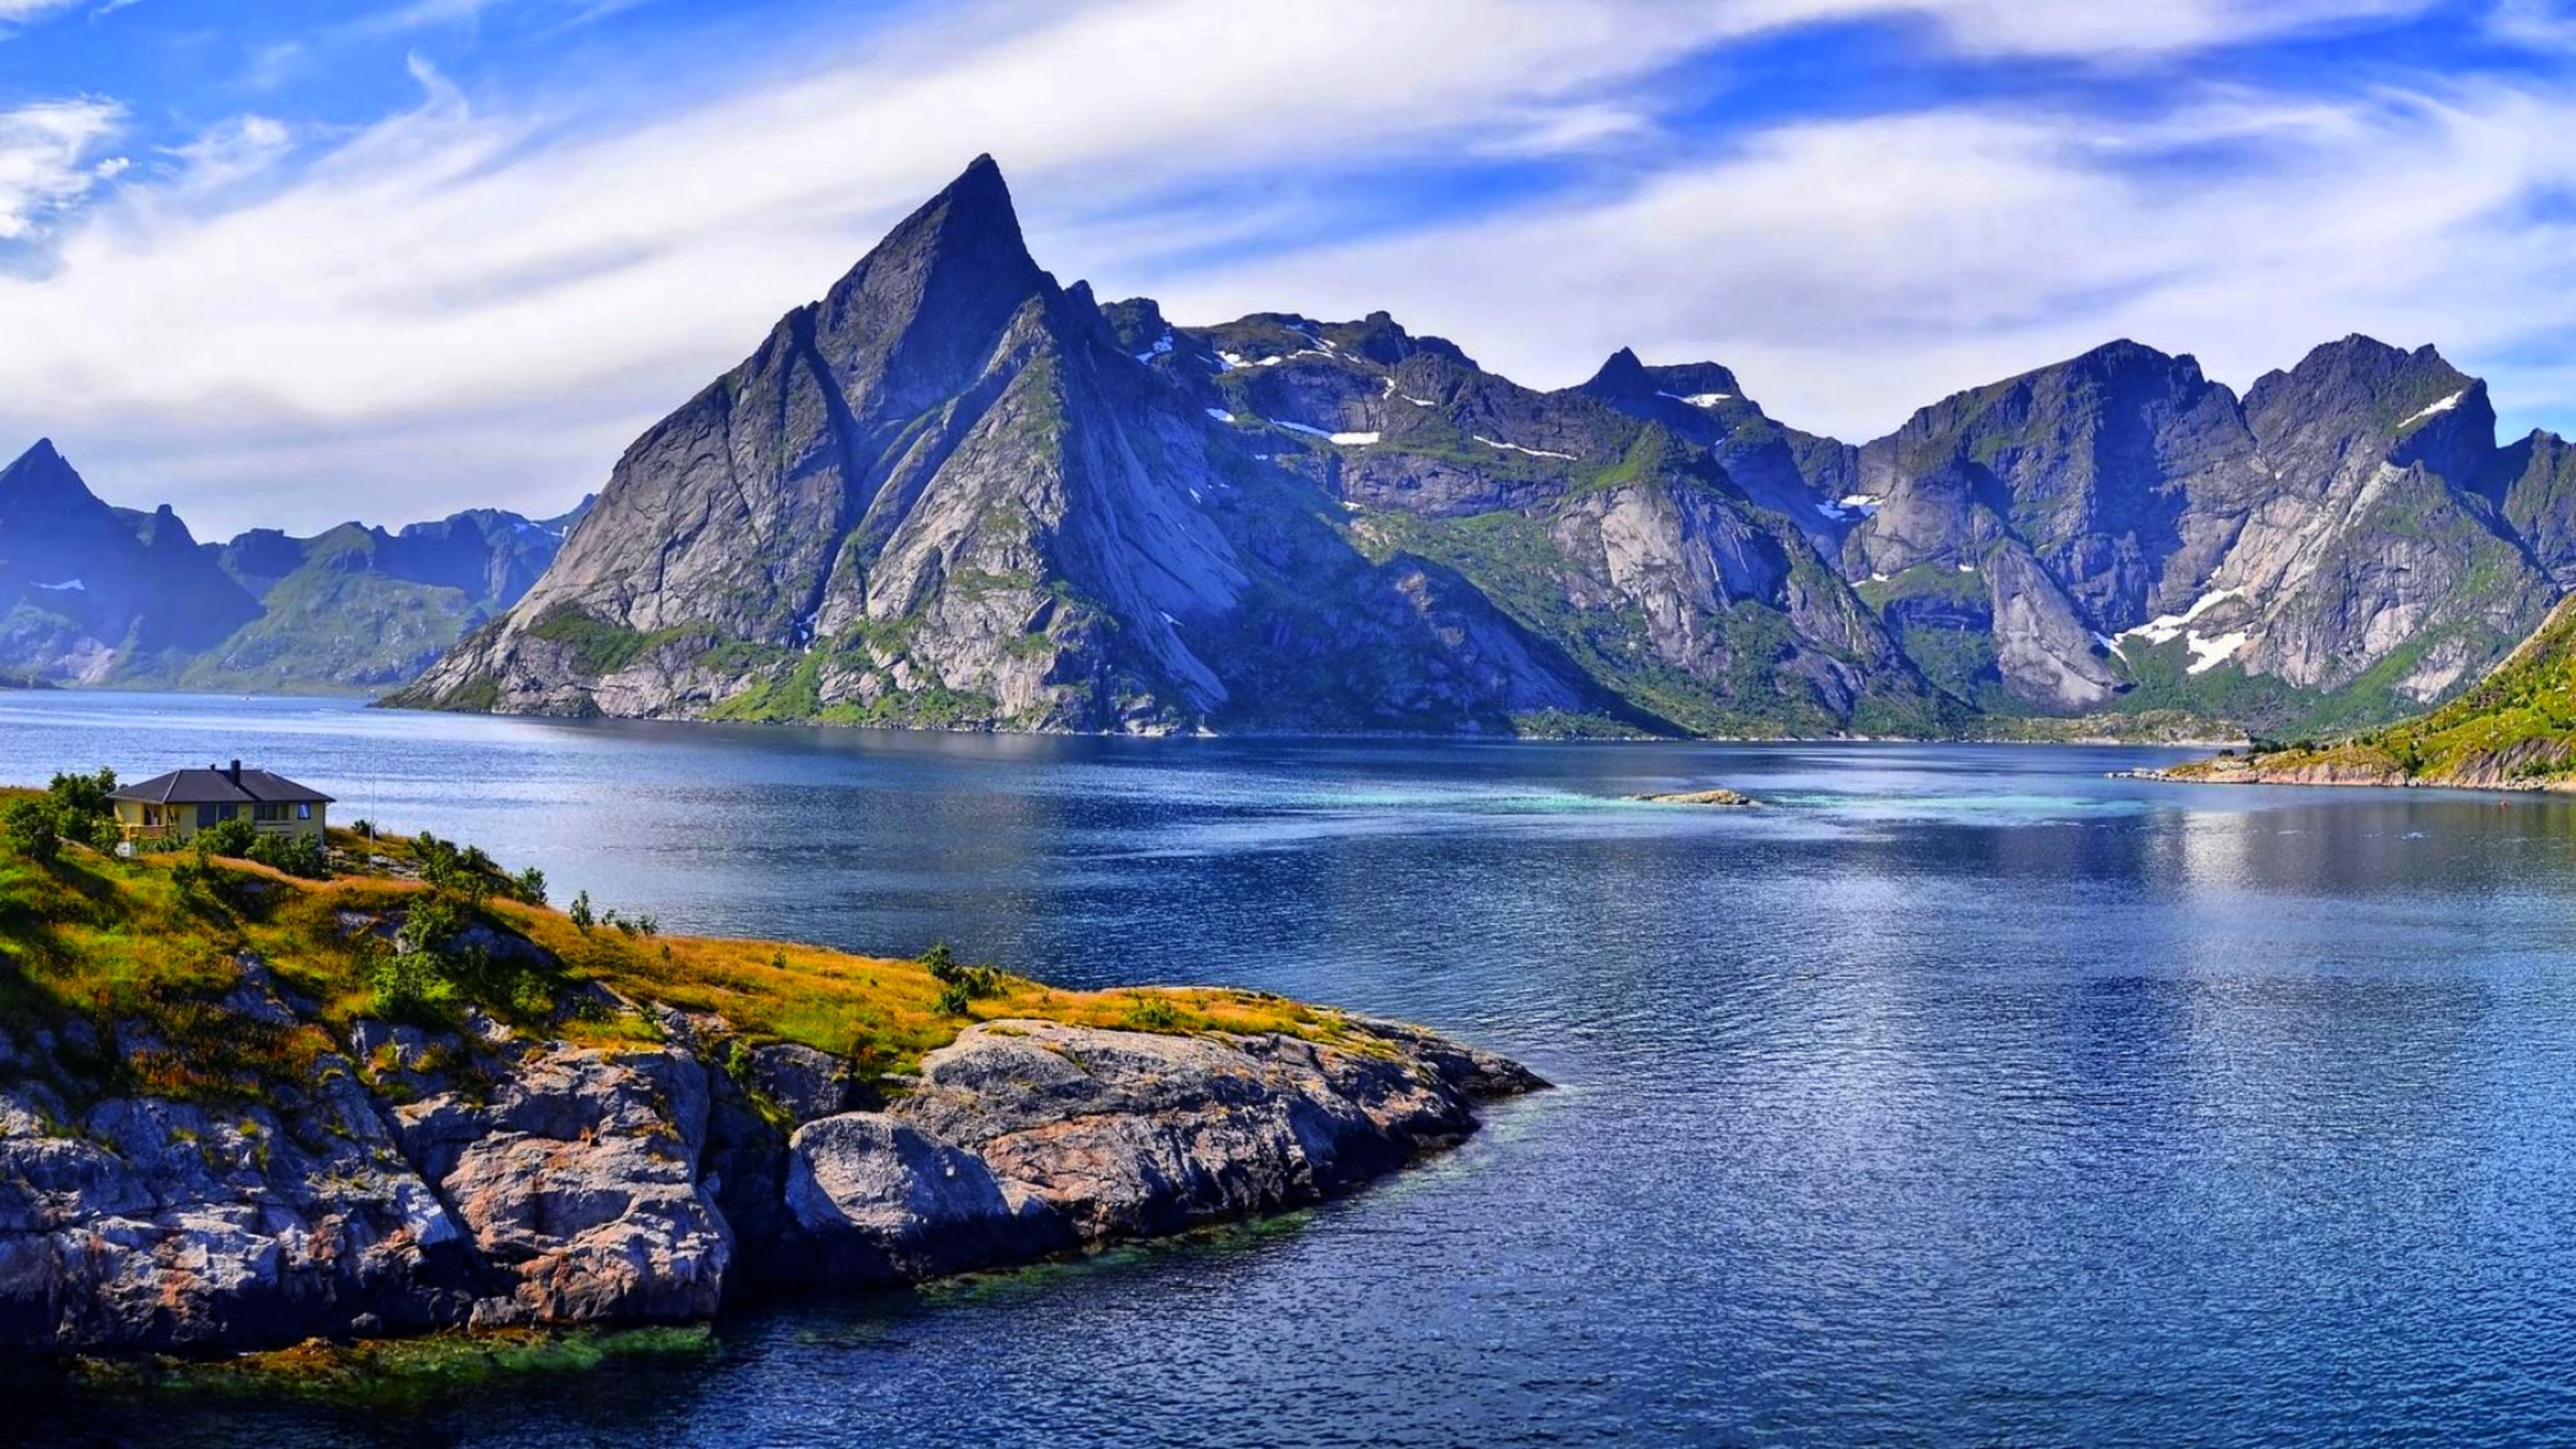 Reine Village In Norway A Fishing Village And An